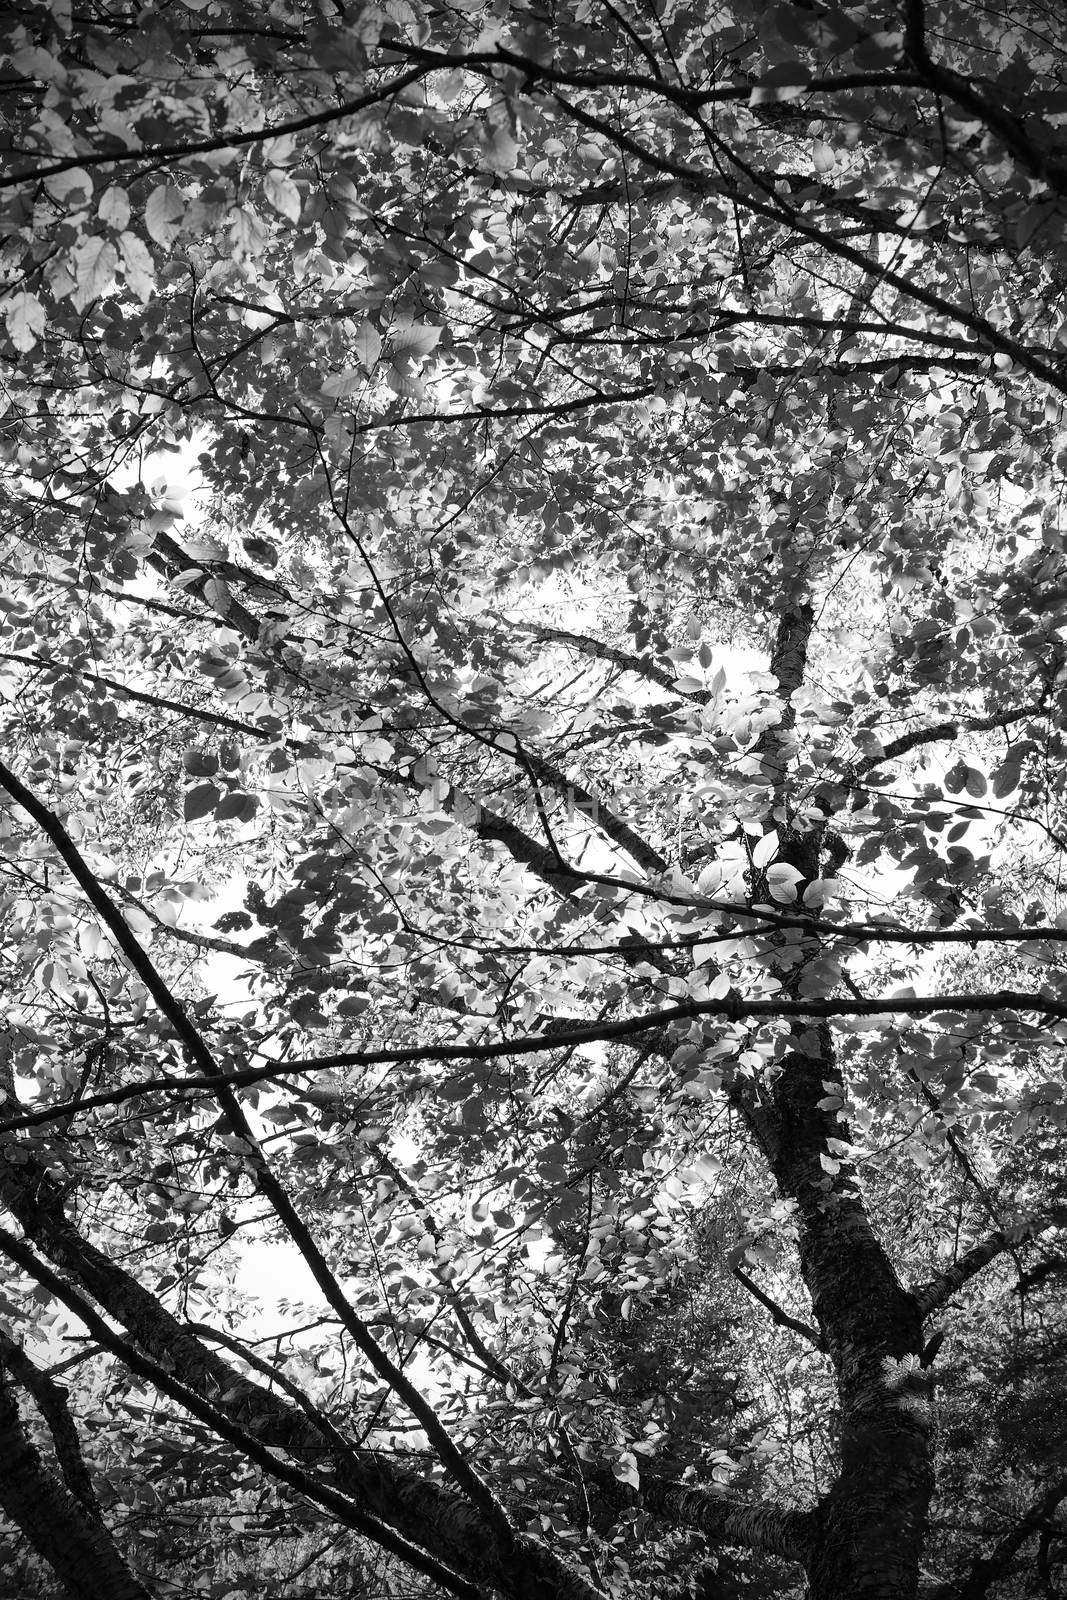 Dramatic black and white underneath a tree looking up at leaves